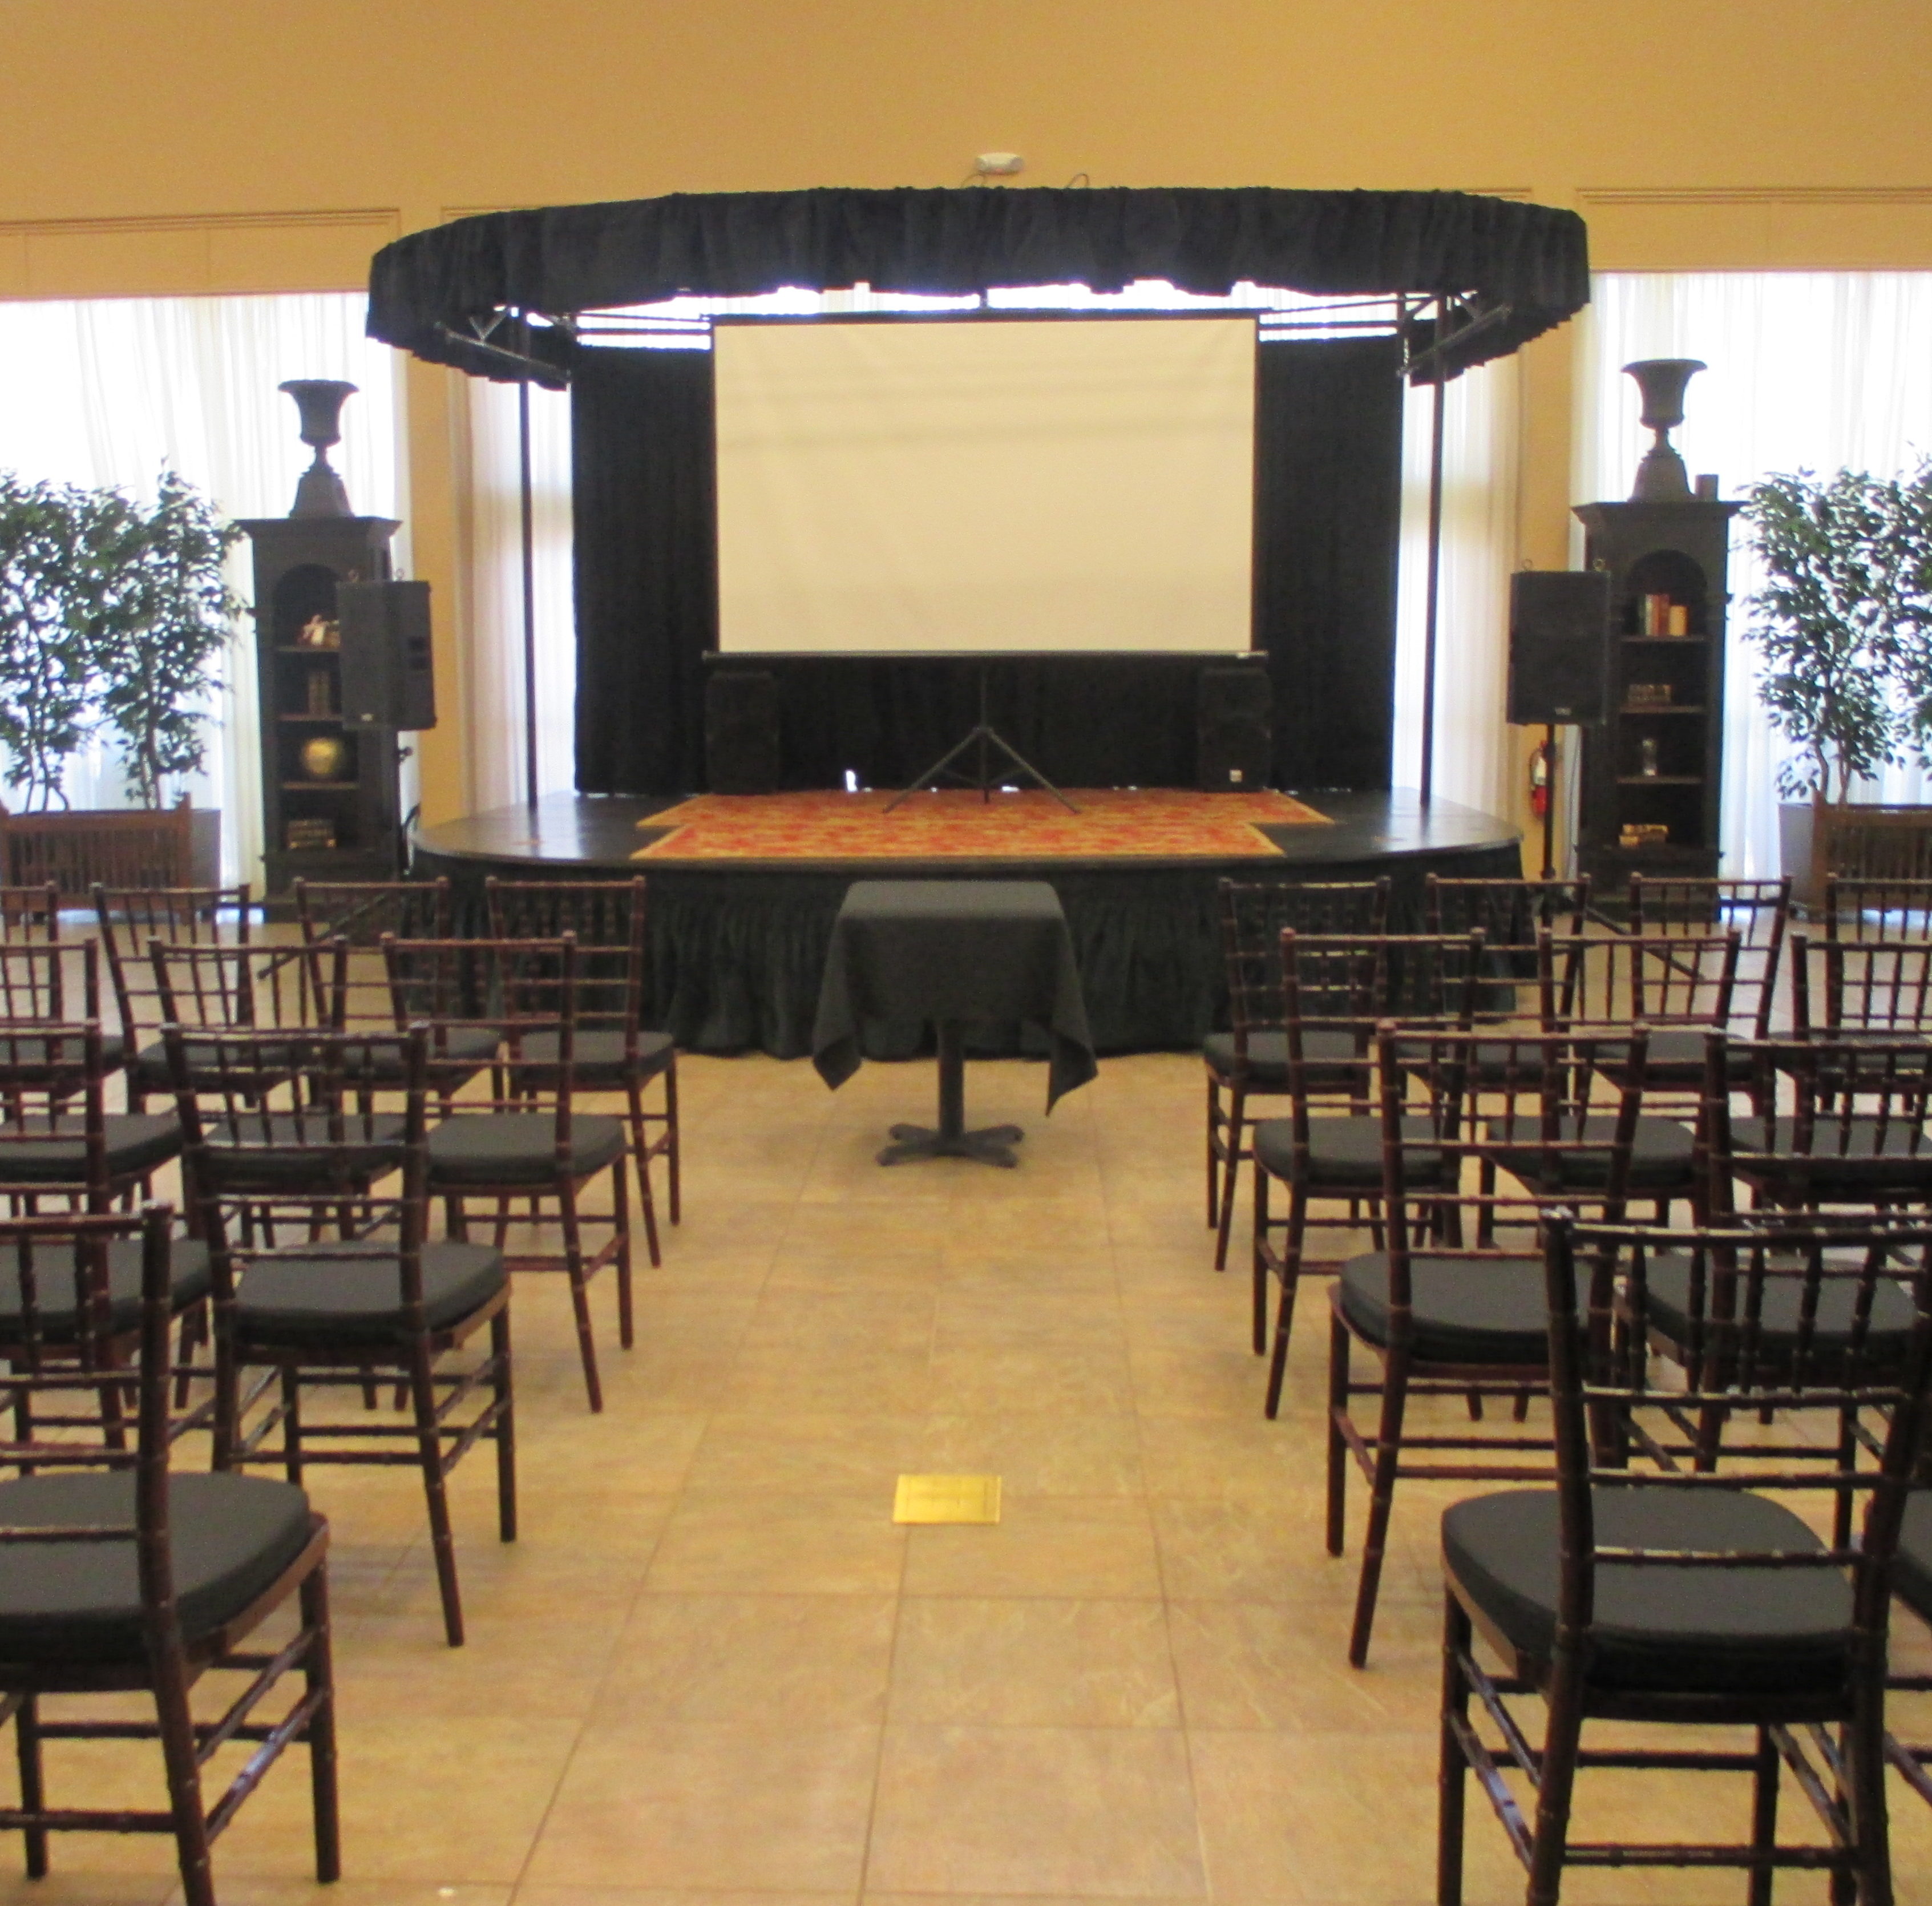 Meetings event space Nevada County rental Grass Valley area